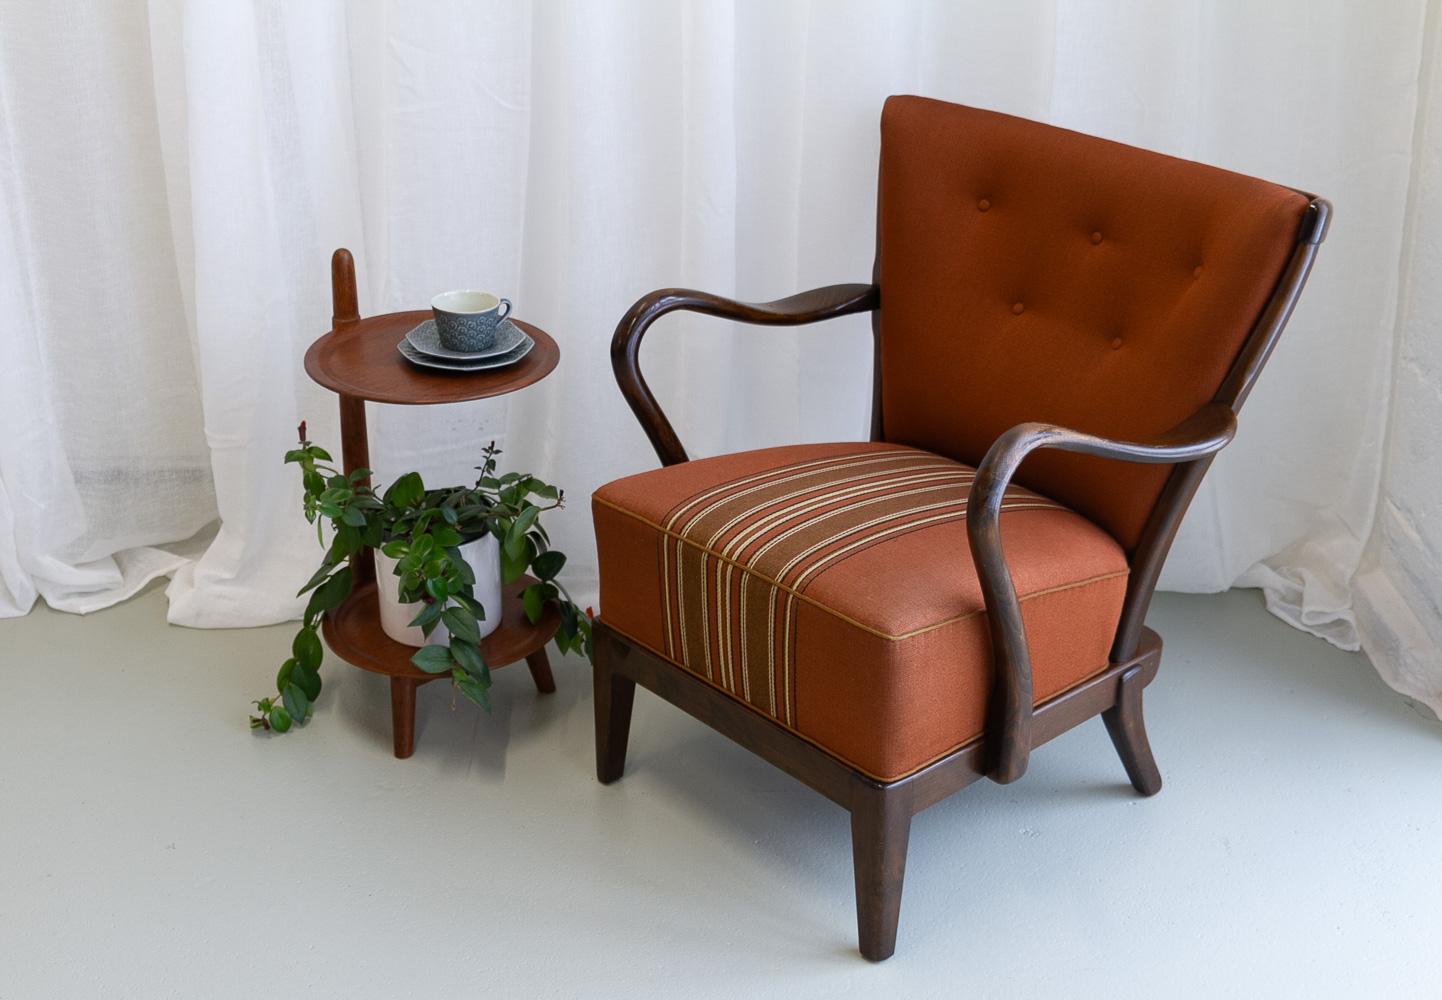 Danish Modern Lounge Chair by Alfred Christensen for Slagelse Møbelværk, 1940s.
Early Mid-Century Modern Danish armchair / easy chair from the 1940s by Alfred Christensen for Slagelse Møbelværk, Denmark.
Frame in stained beech. Wide curved back with